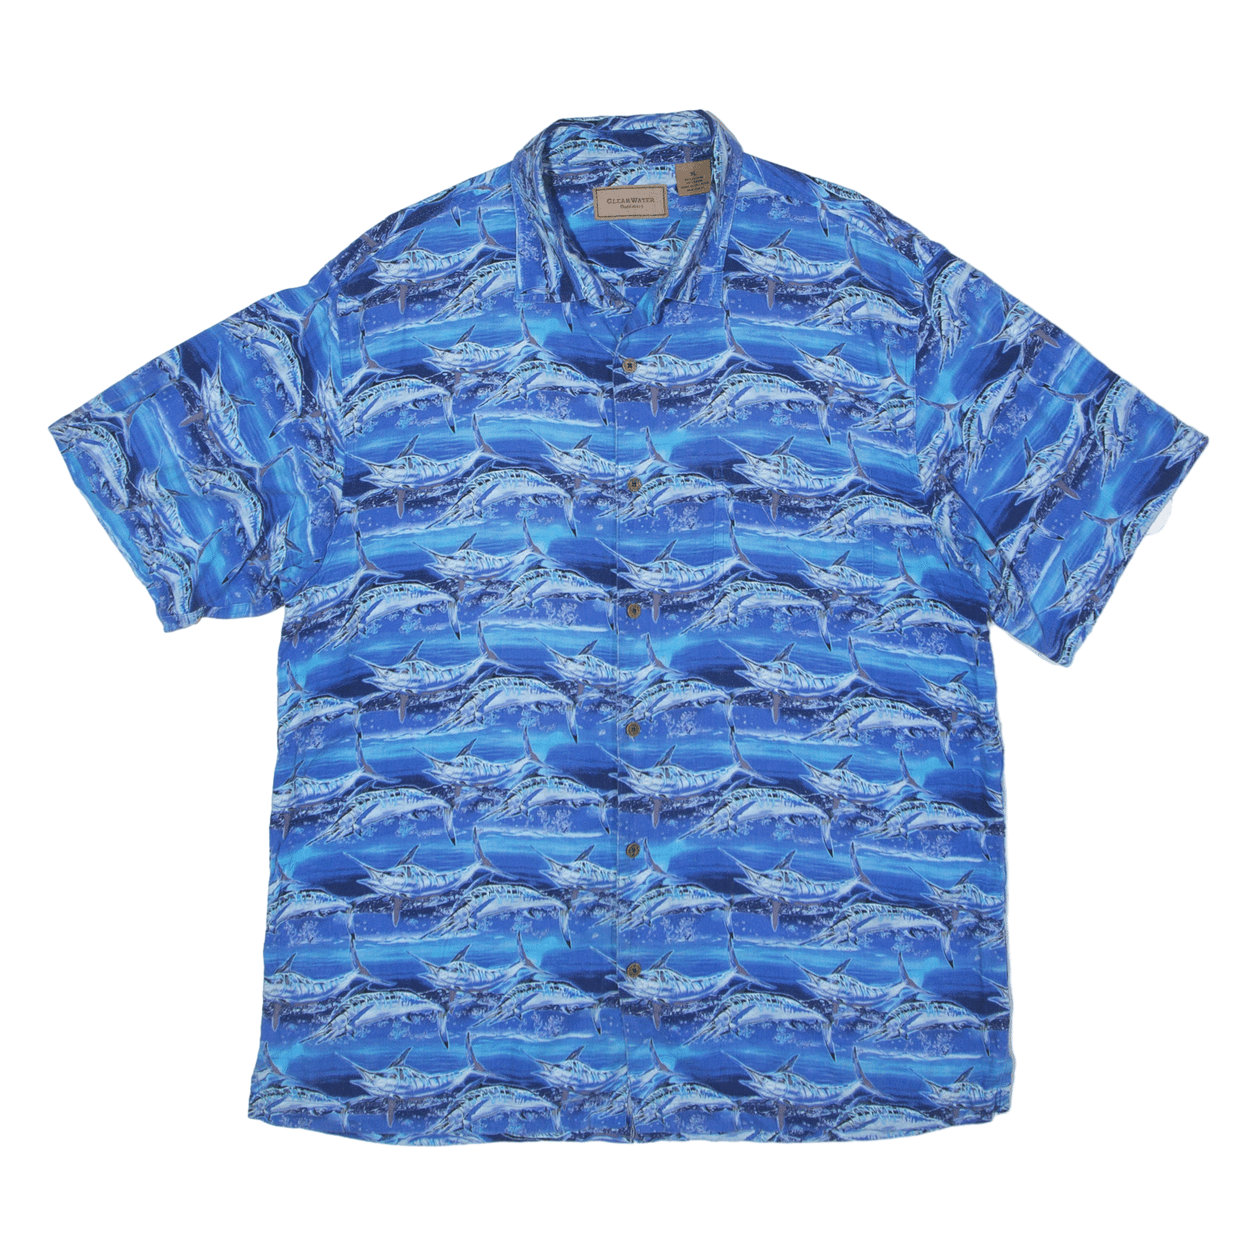 CLEARWATER OUTFITTERS Fish Print Hawaiian Shirt Blue Short Sleeve